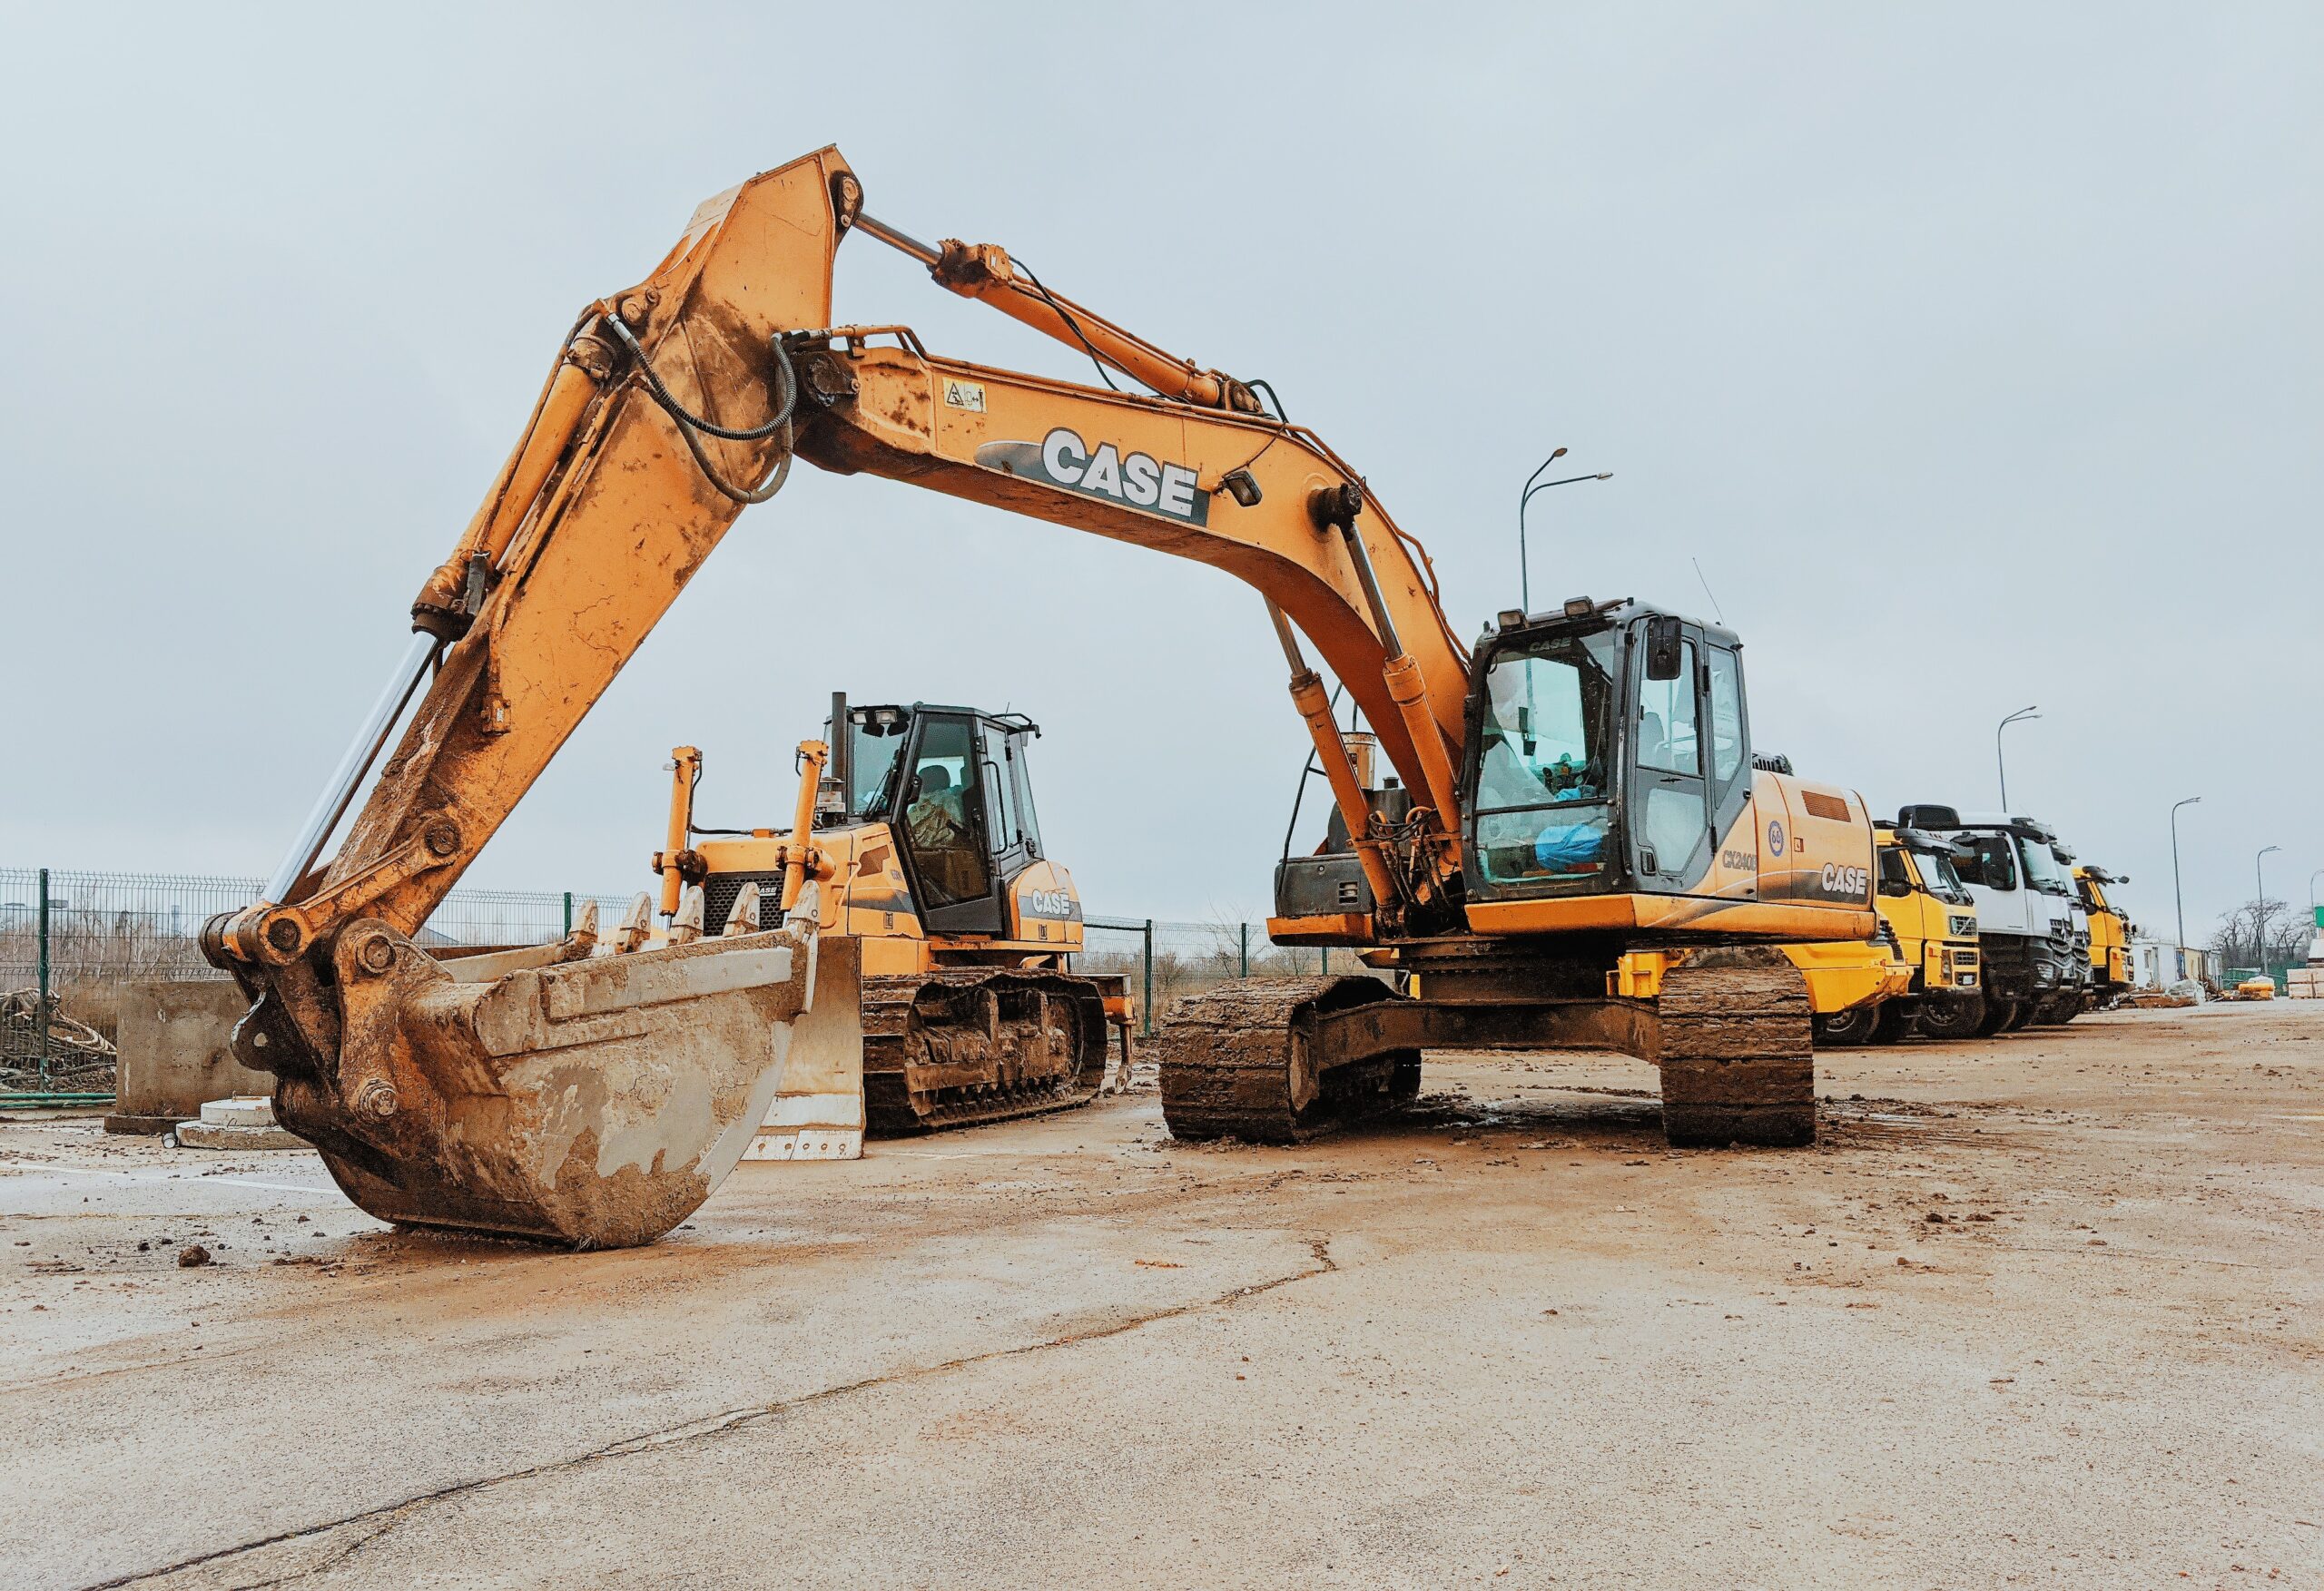 Excavator and large digging equipment on a roadway.